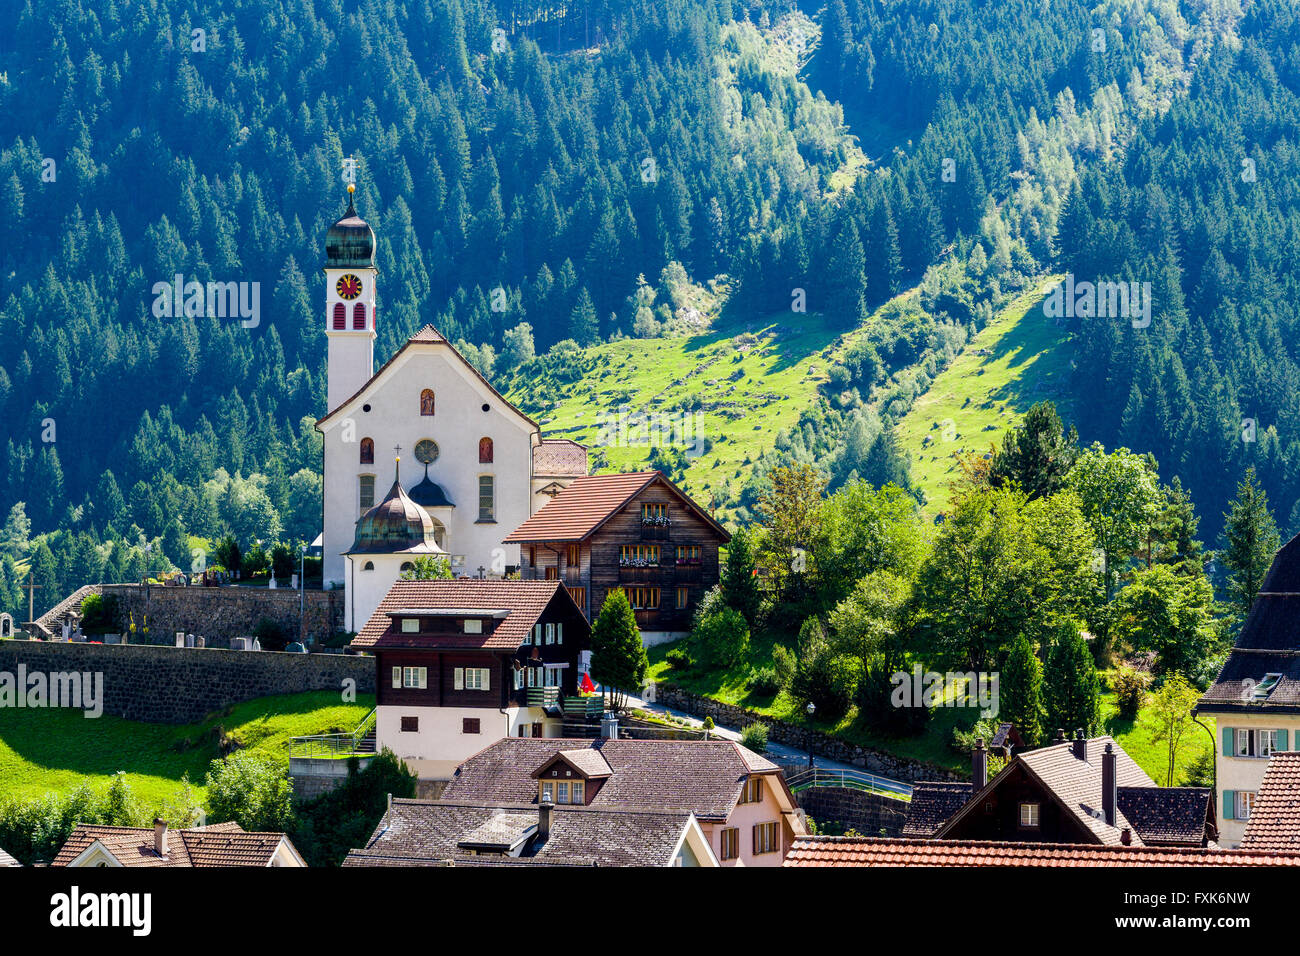 Village with church, high altitude landscape with mountains, green meadows and trees, Wassen, Graubünden, Switzerland Stock Photo